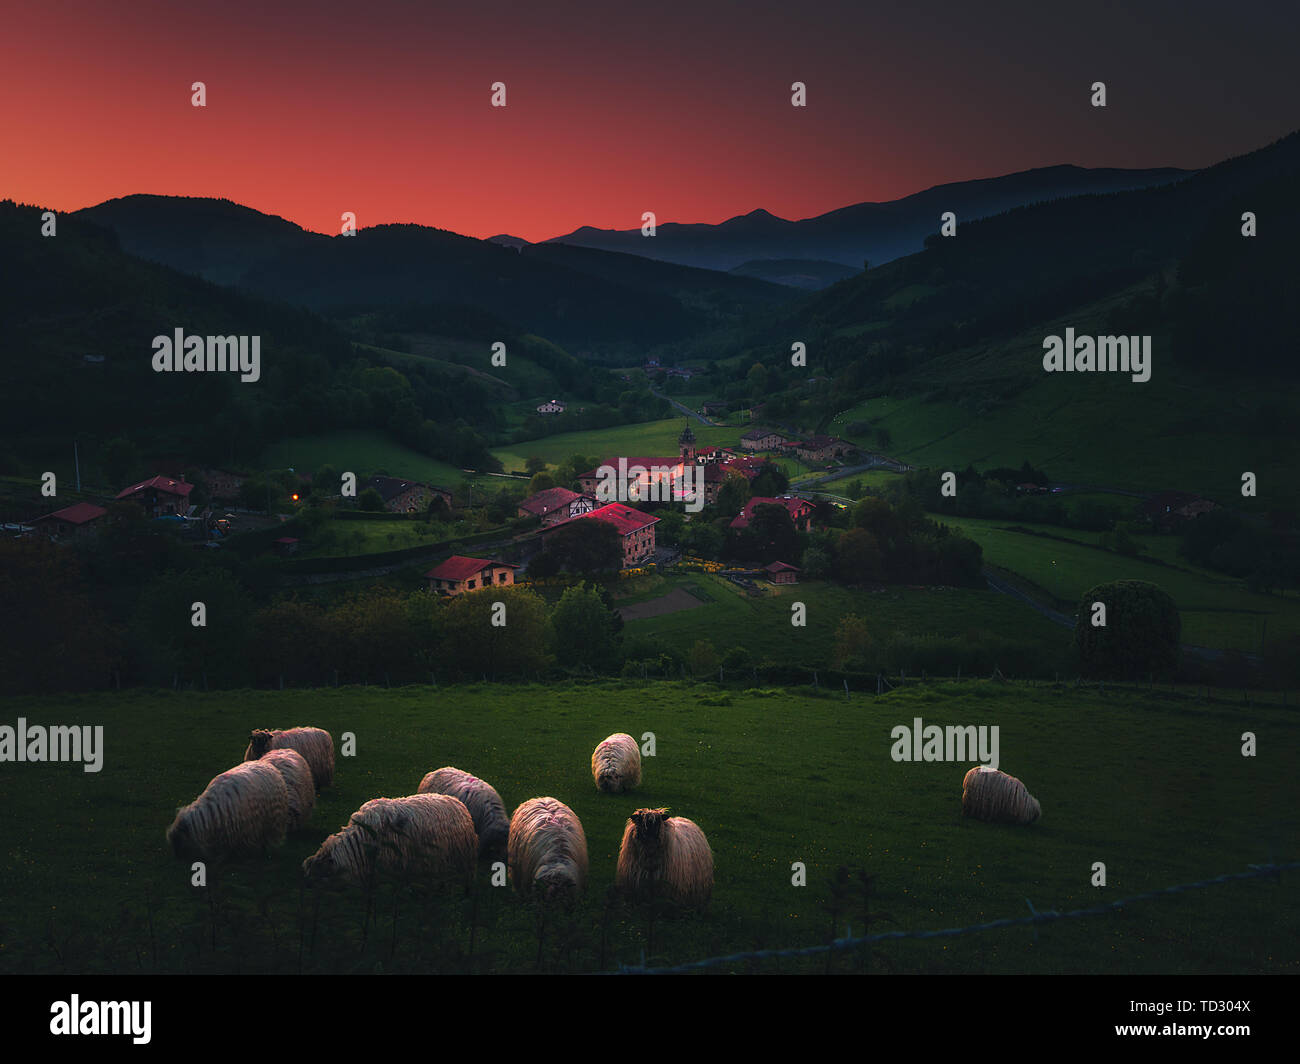 Arrazola village with sheep in Atxondo at the evening Stock Photo